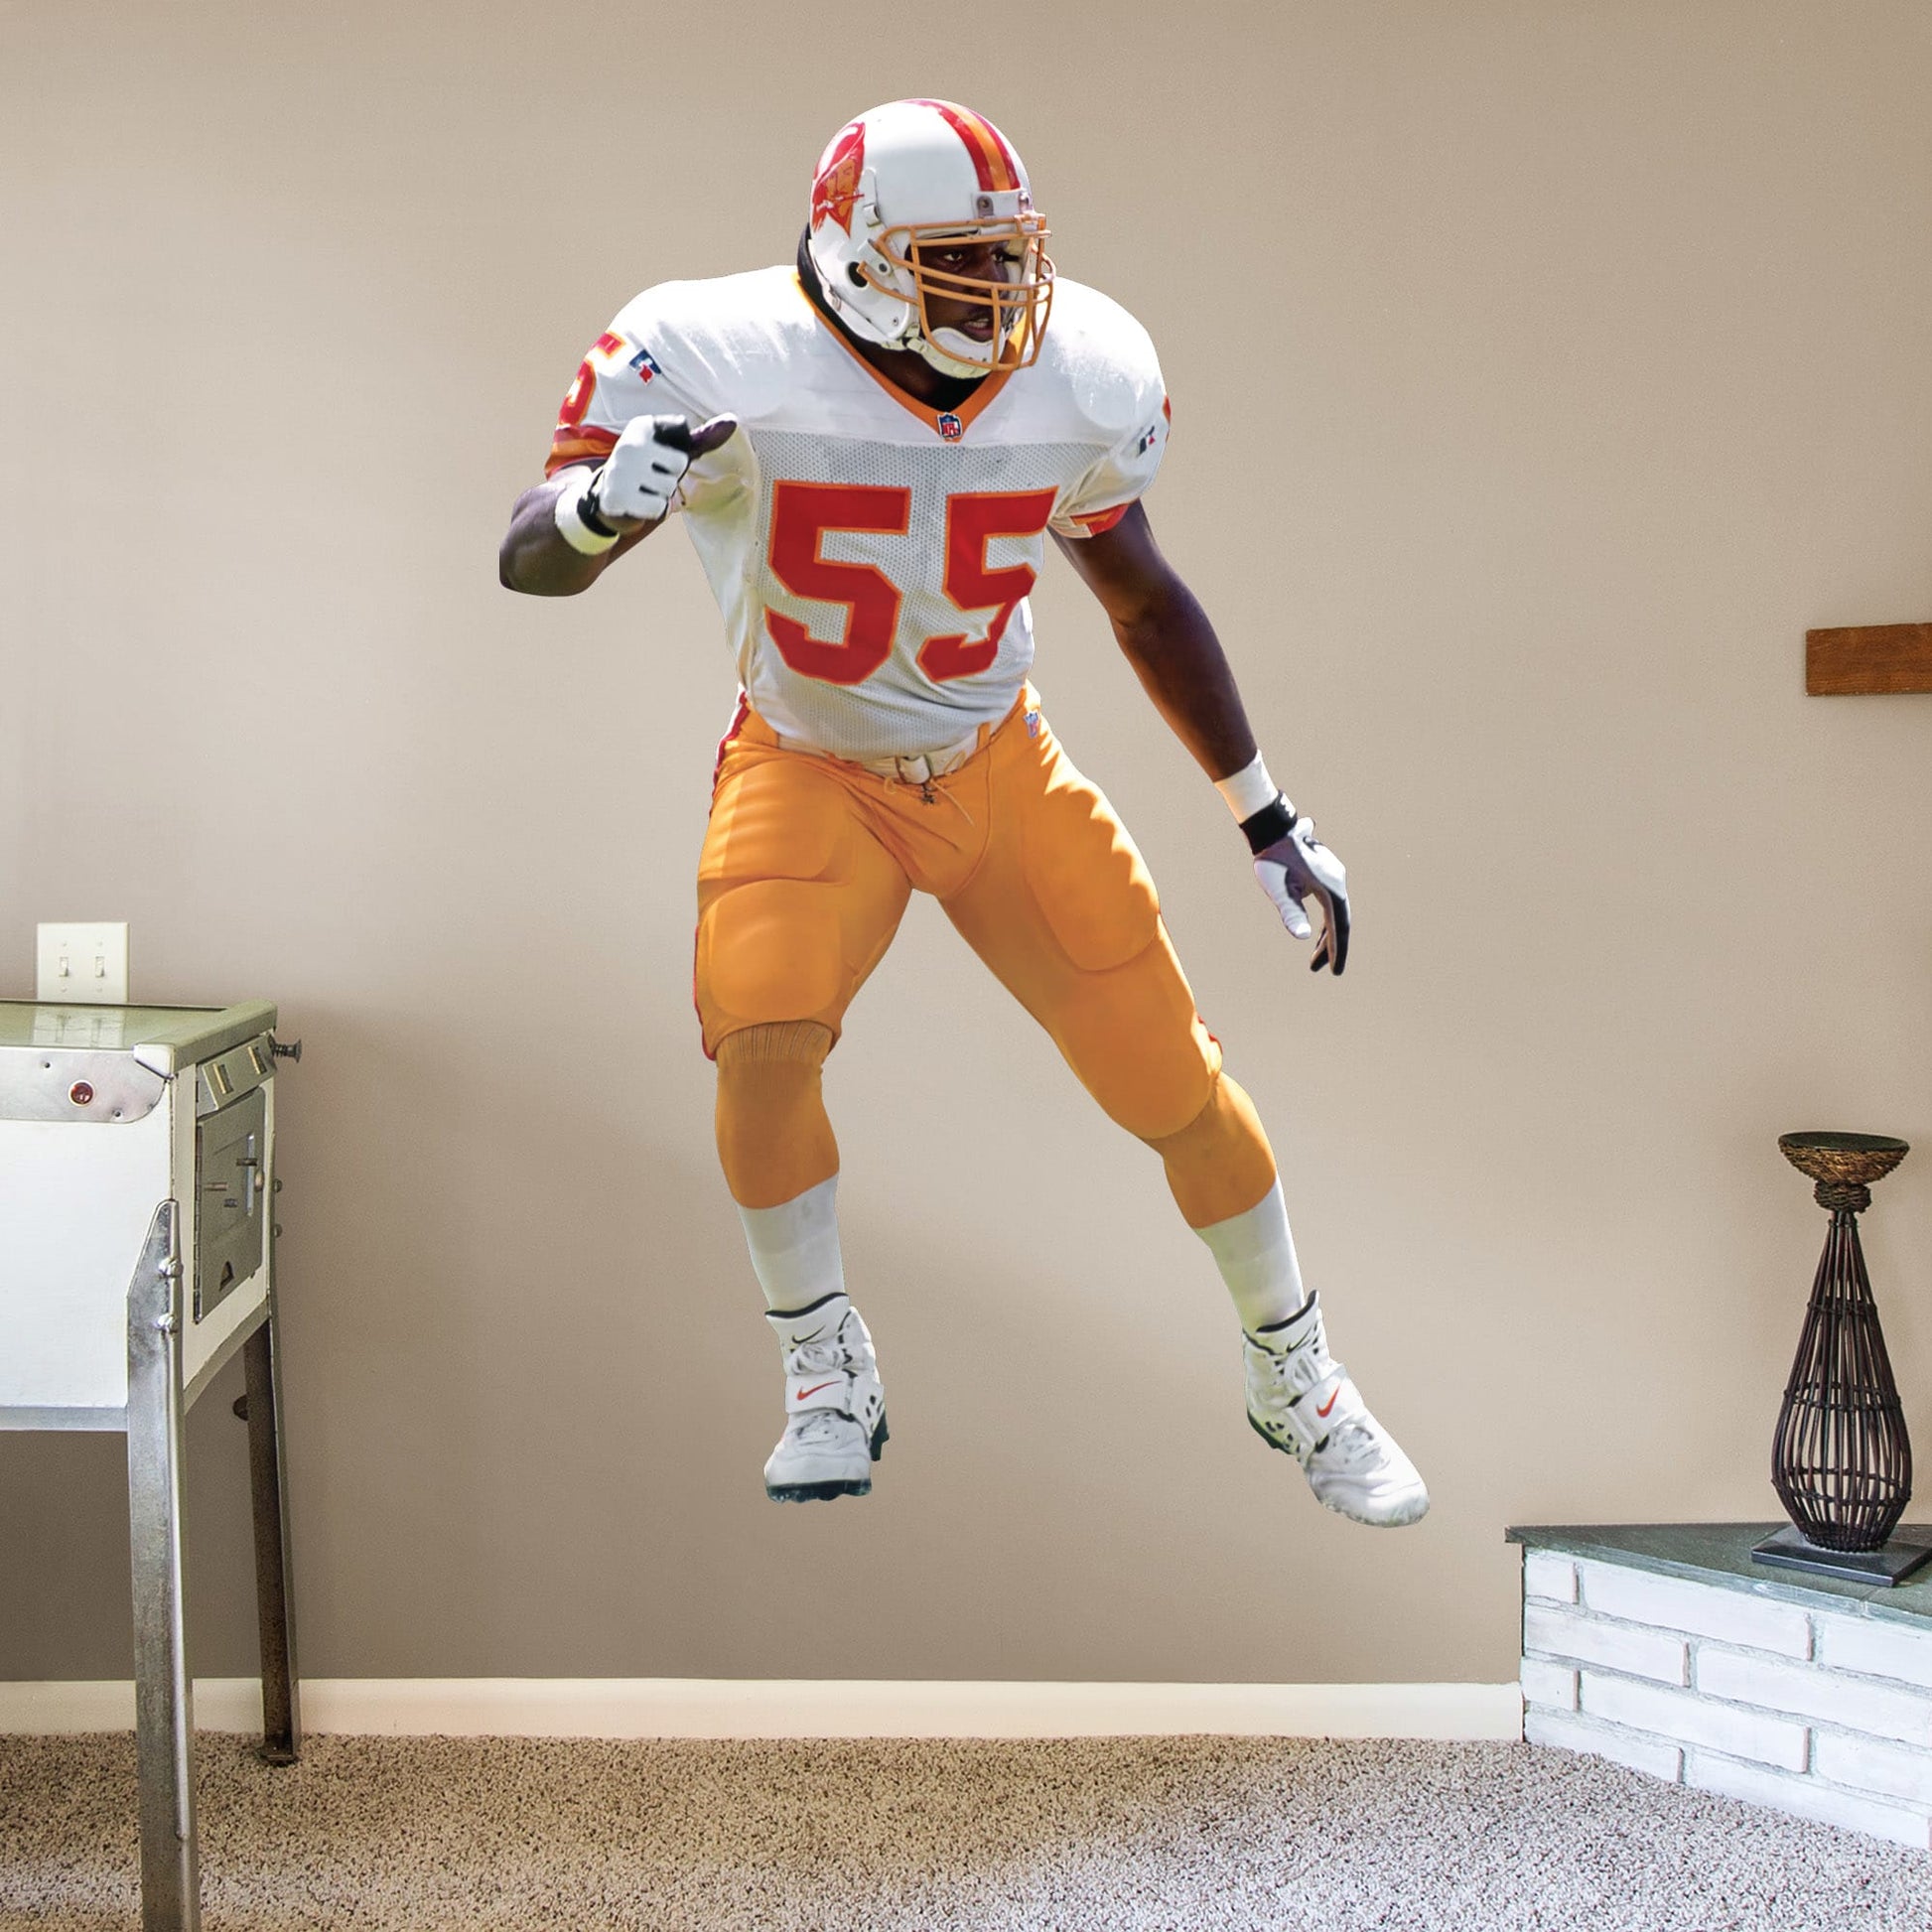 Life-Size Athlete + 2 Decals (51"W x 78"H) Immortalize The Sheriff's amazing career on your wall with this officially licensed decal. Derrick Brooks' amazing accolades range from Super Bowl champion to his 11 Pro Bowl appearances, and he has rightfully taken his place in the Pro Football Hall of Fame. This high-quality decal makes a great gift, and it can be removed and reaffixed to walls as you decide on the best place to show off your Bucs pride for this legend's impressive impact on the sport.